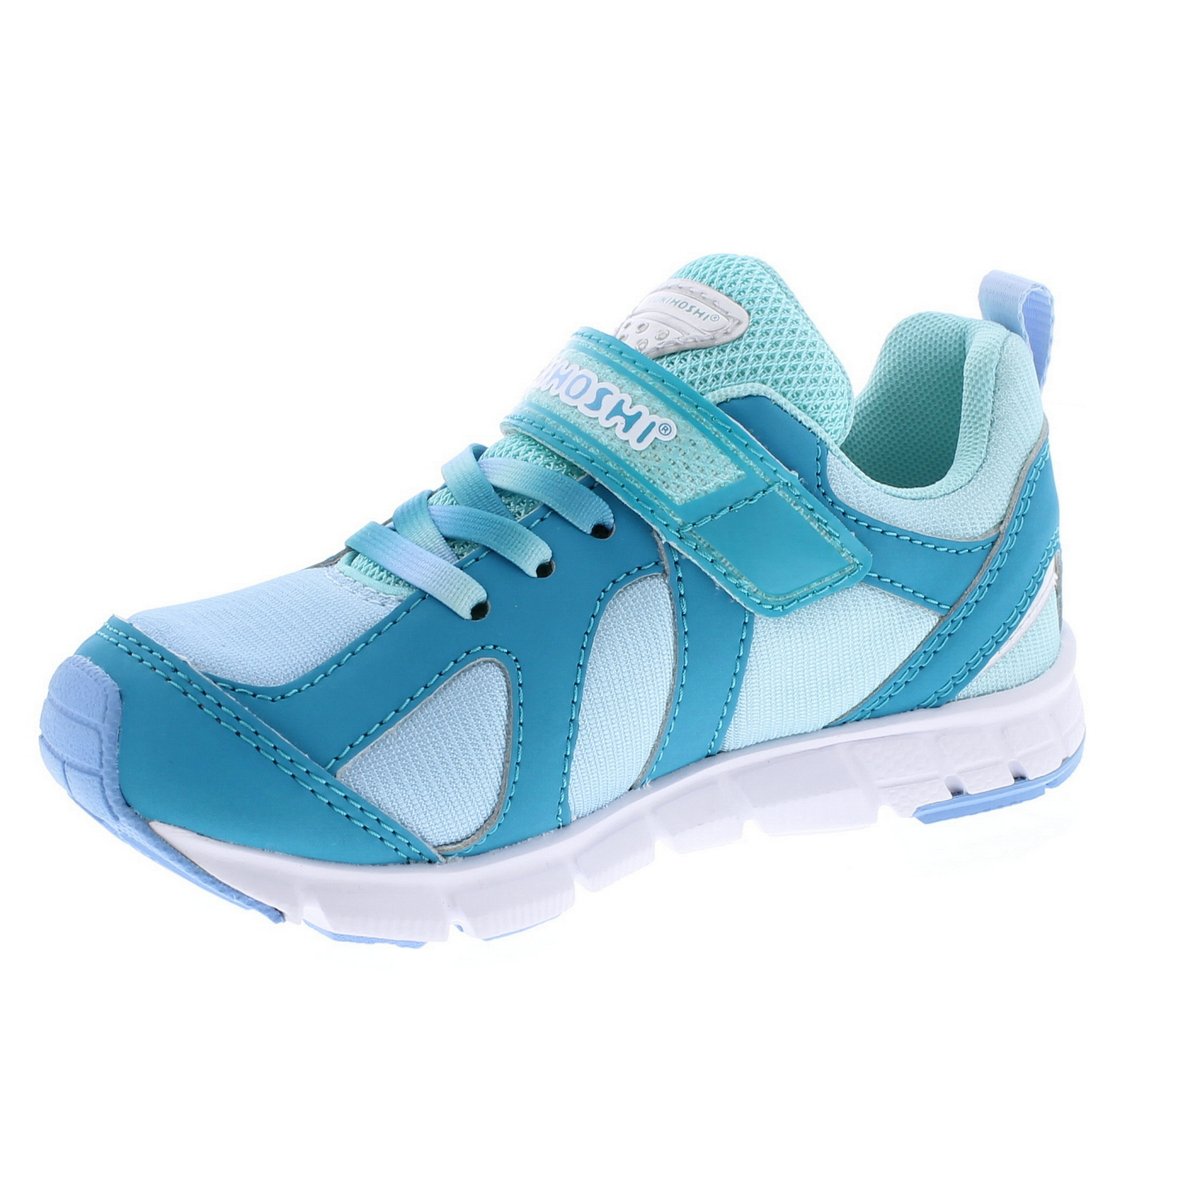 Child Tsukihoshi Rainbow Sneaker in Marine/Blue from the front view